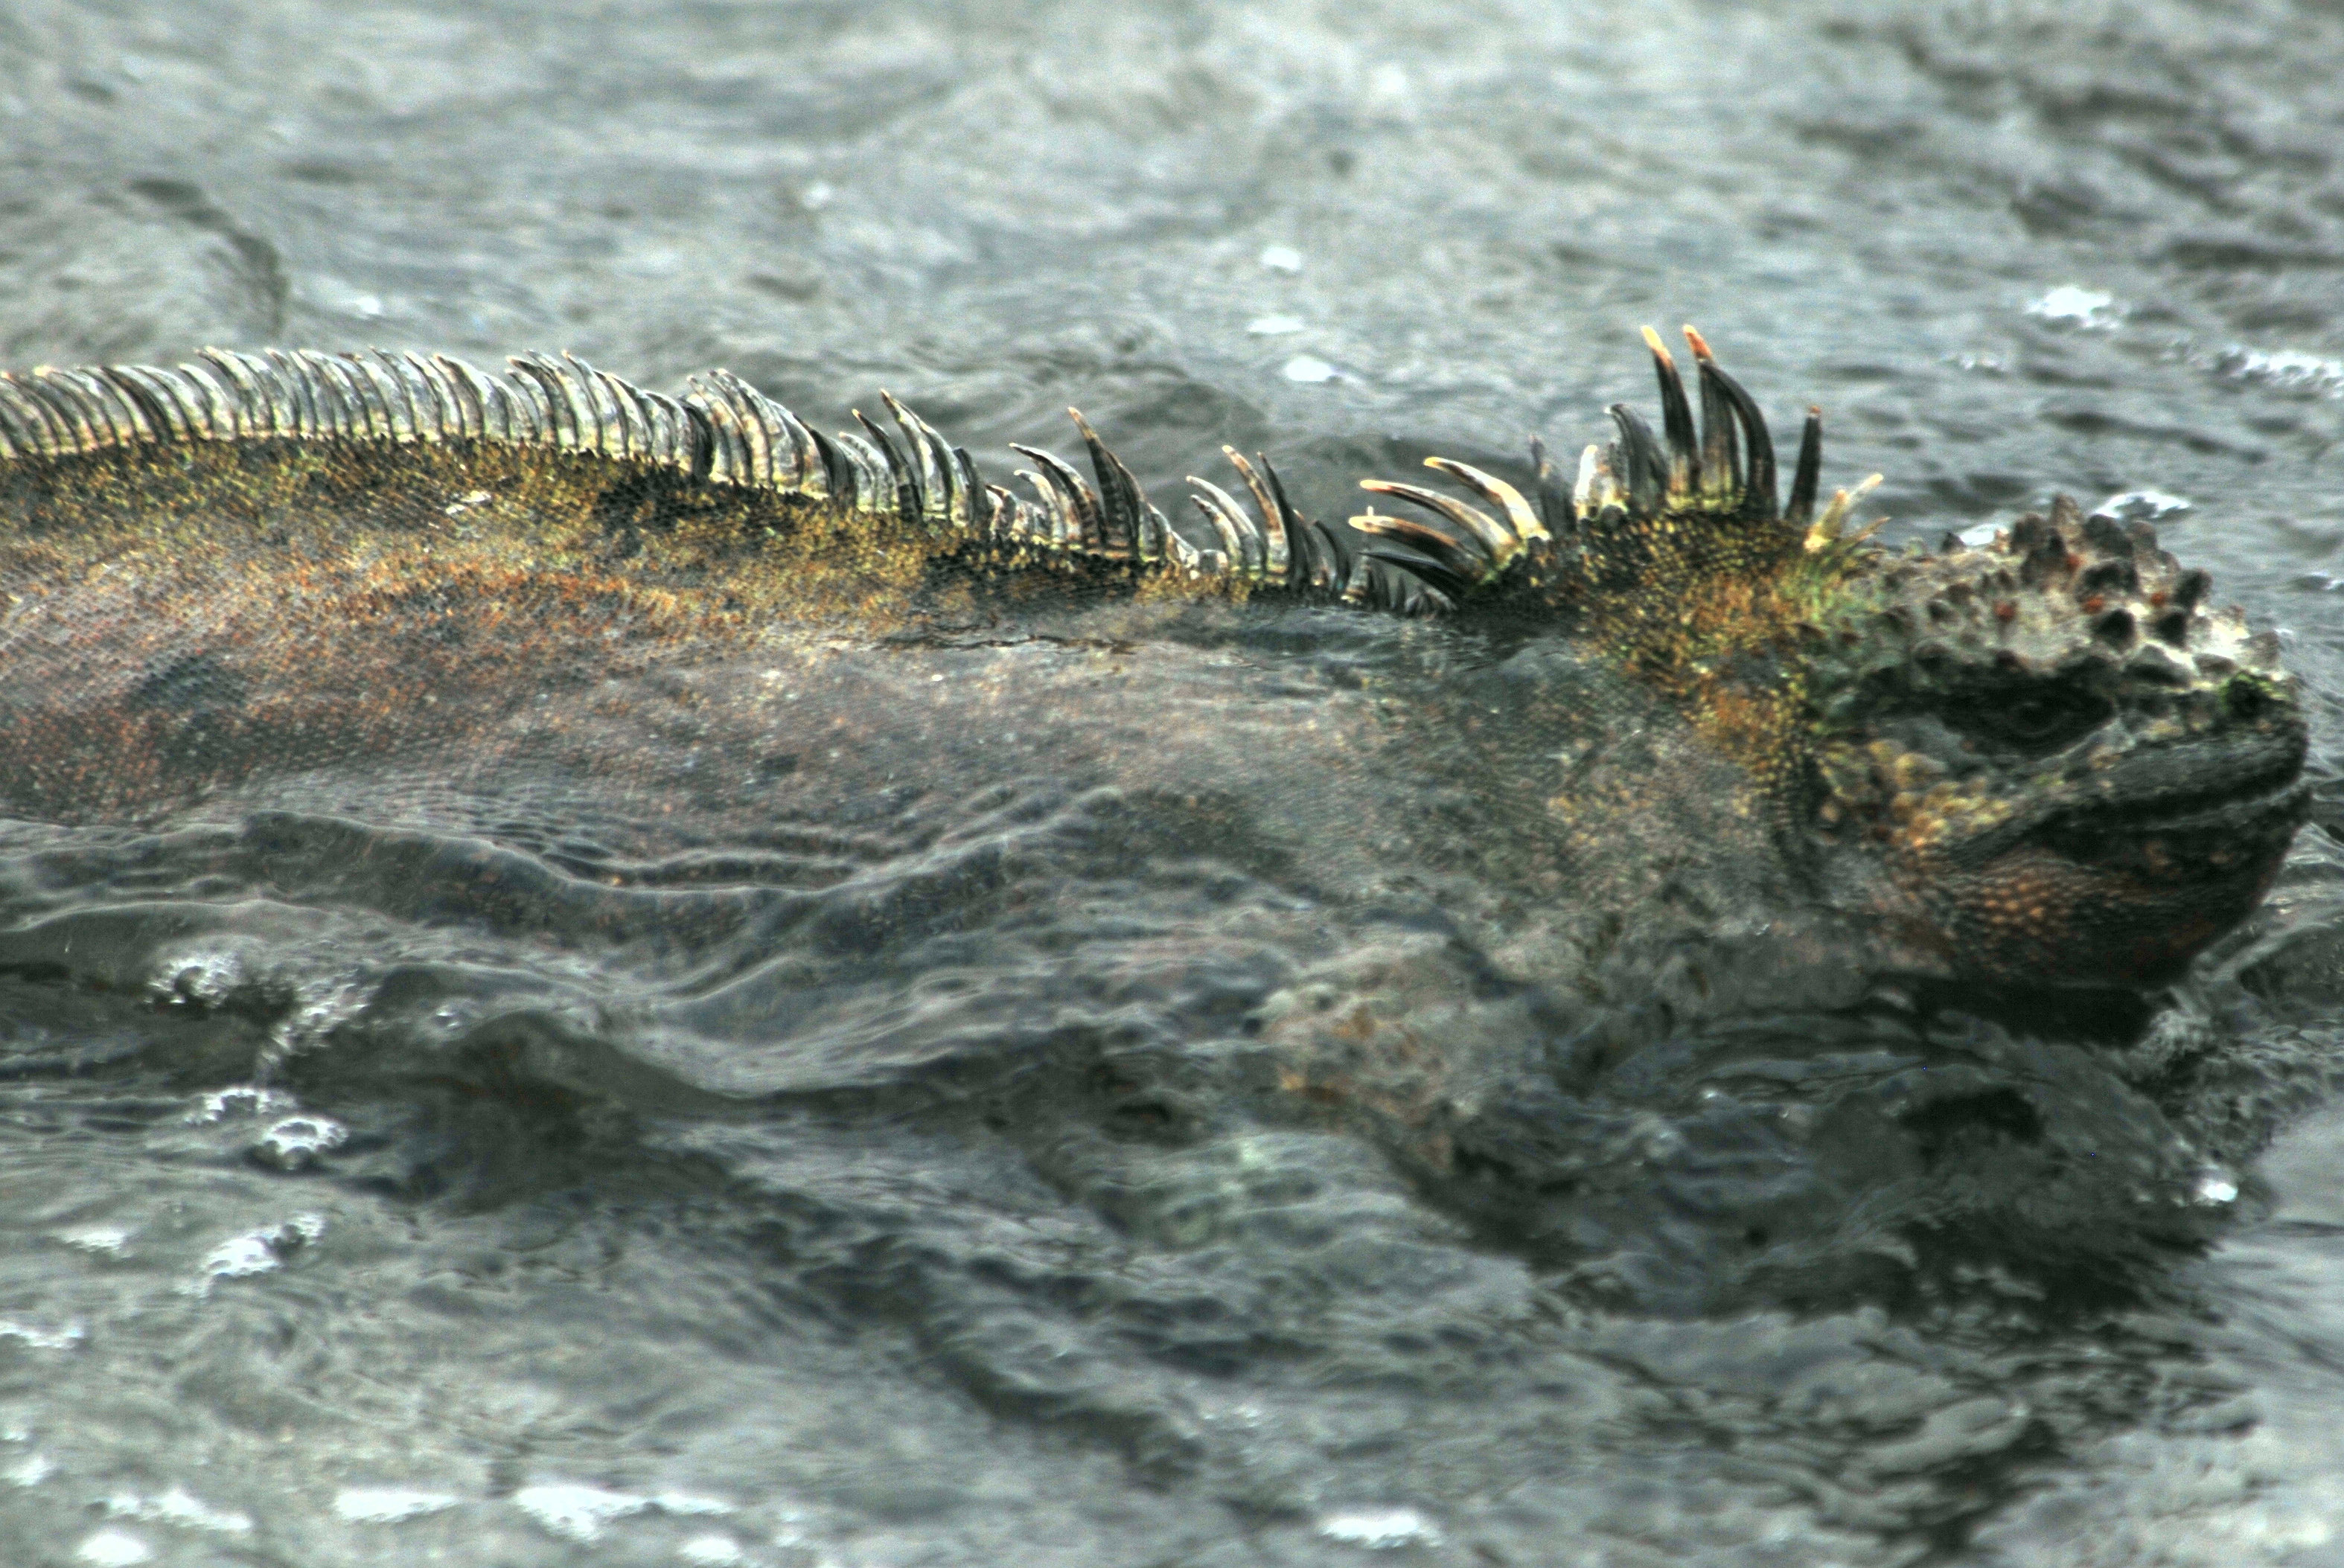 Click picture to see more Marine Iguanas.